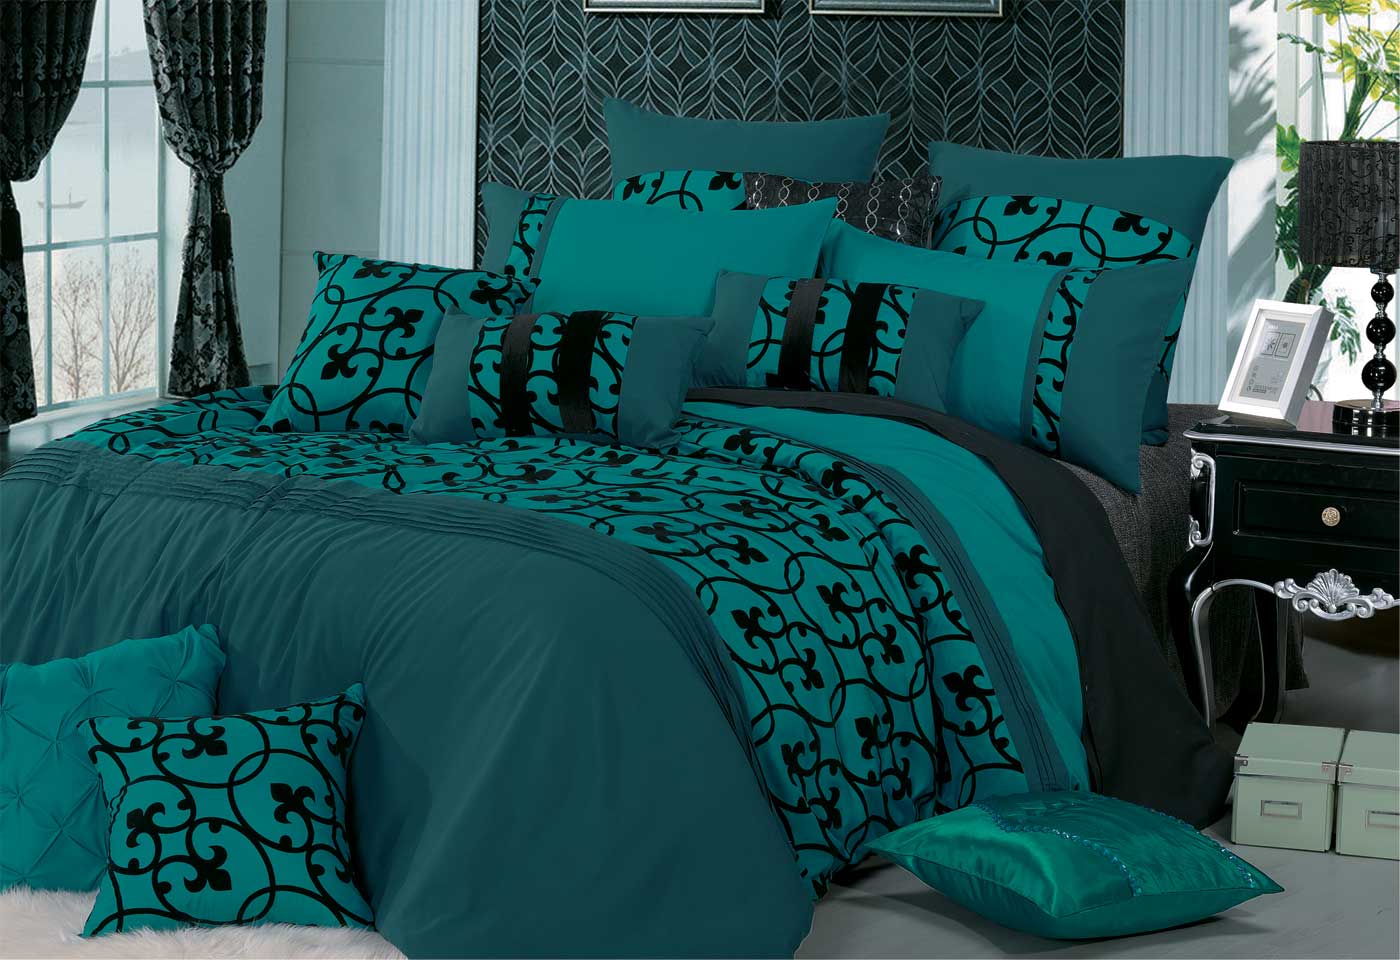 Lyde Deep Teal Green Quilt Cover 3pcs Doona Cover Set /optionals ( Queen / King / Super King / Double / optionals)